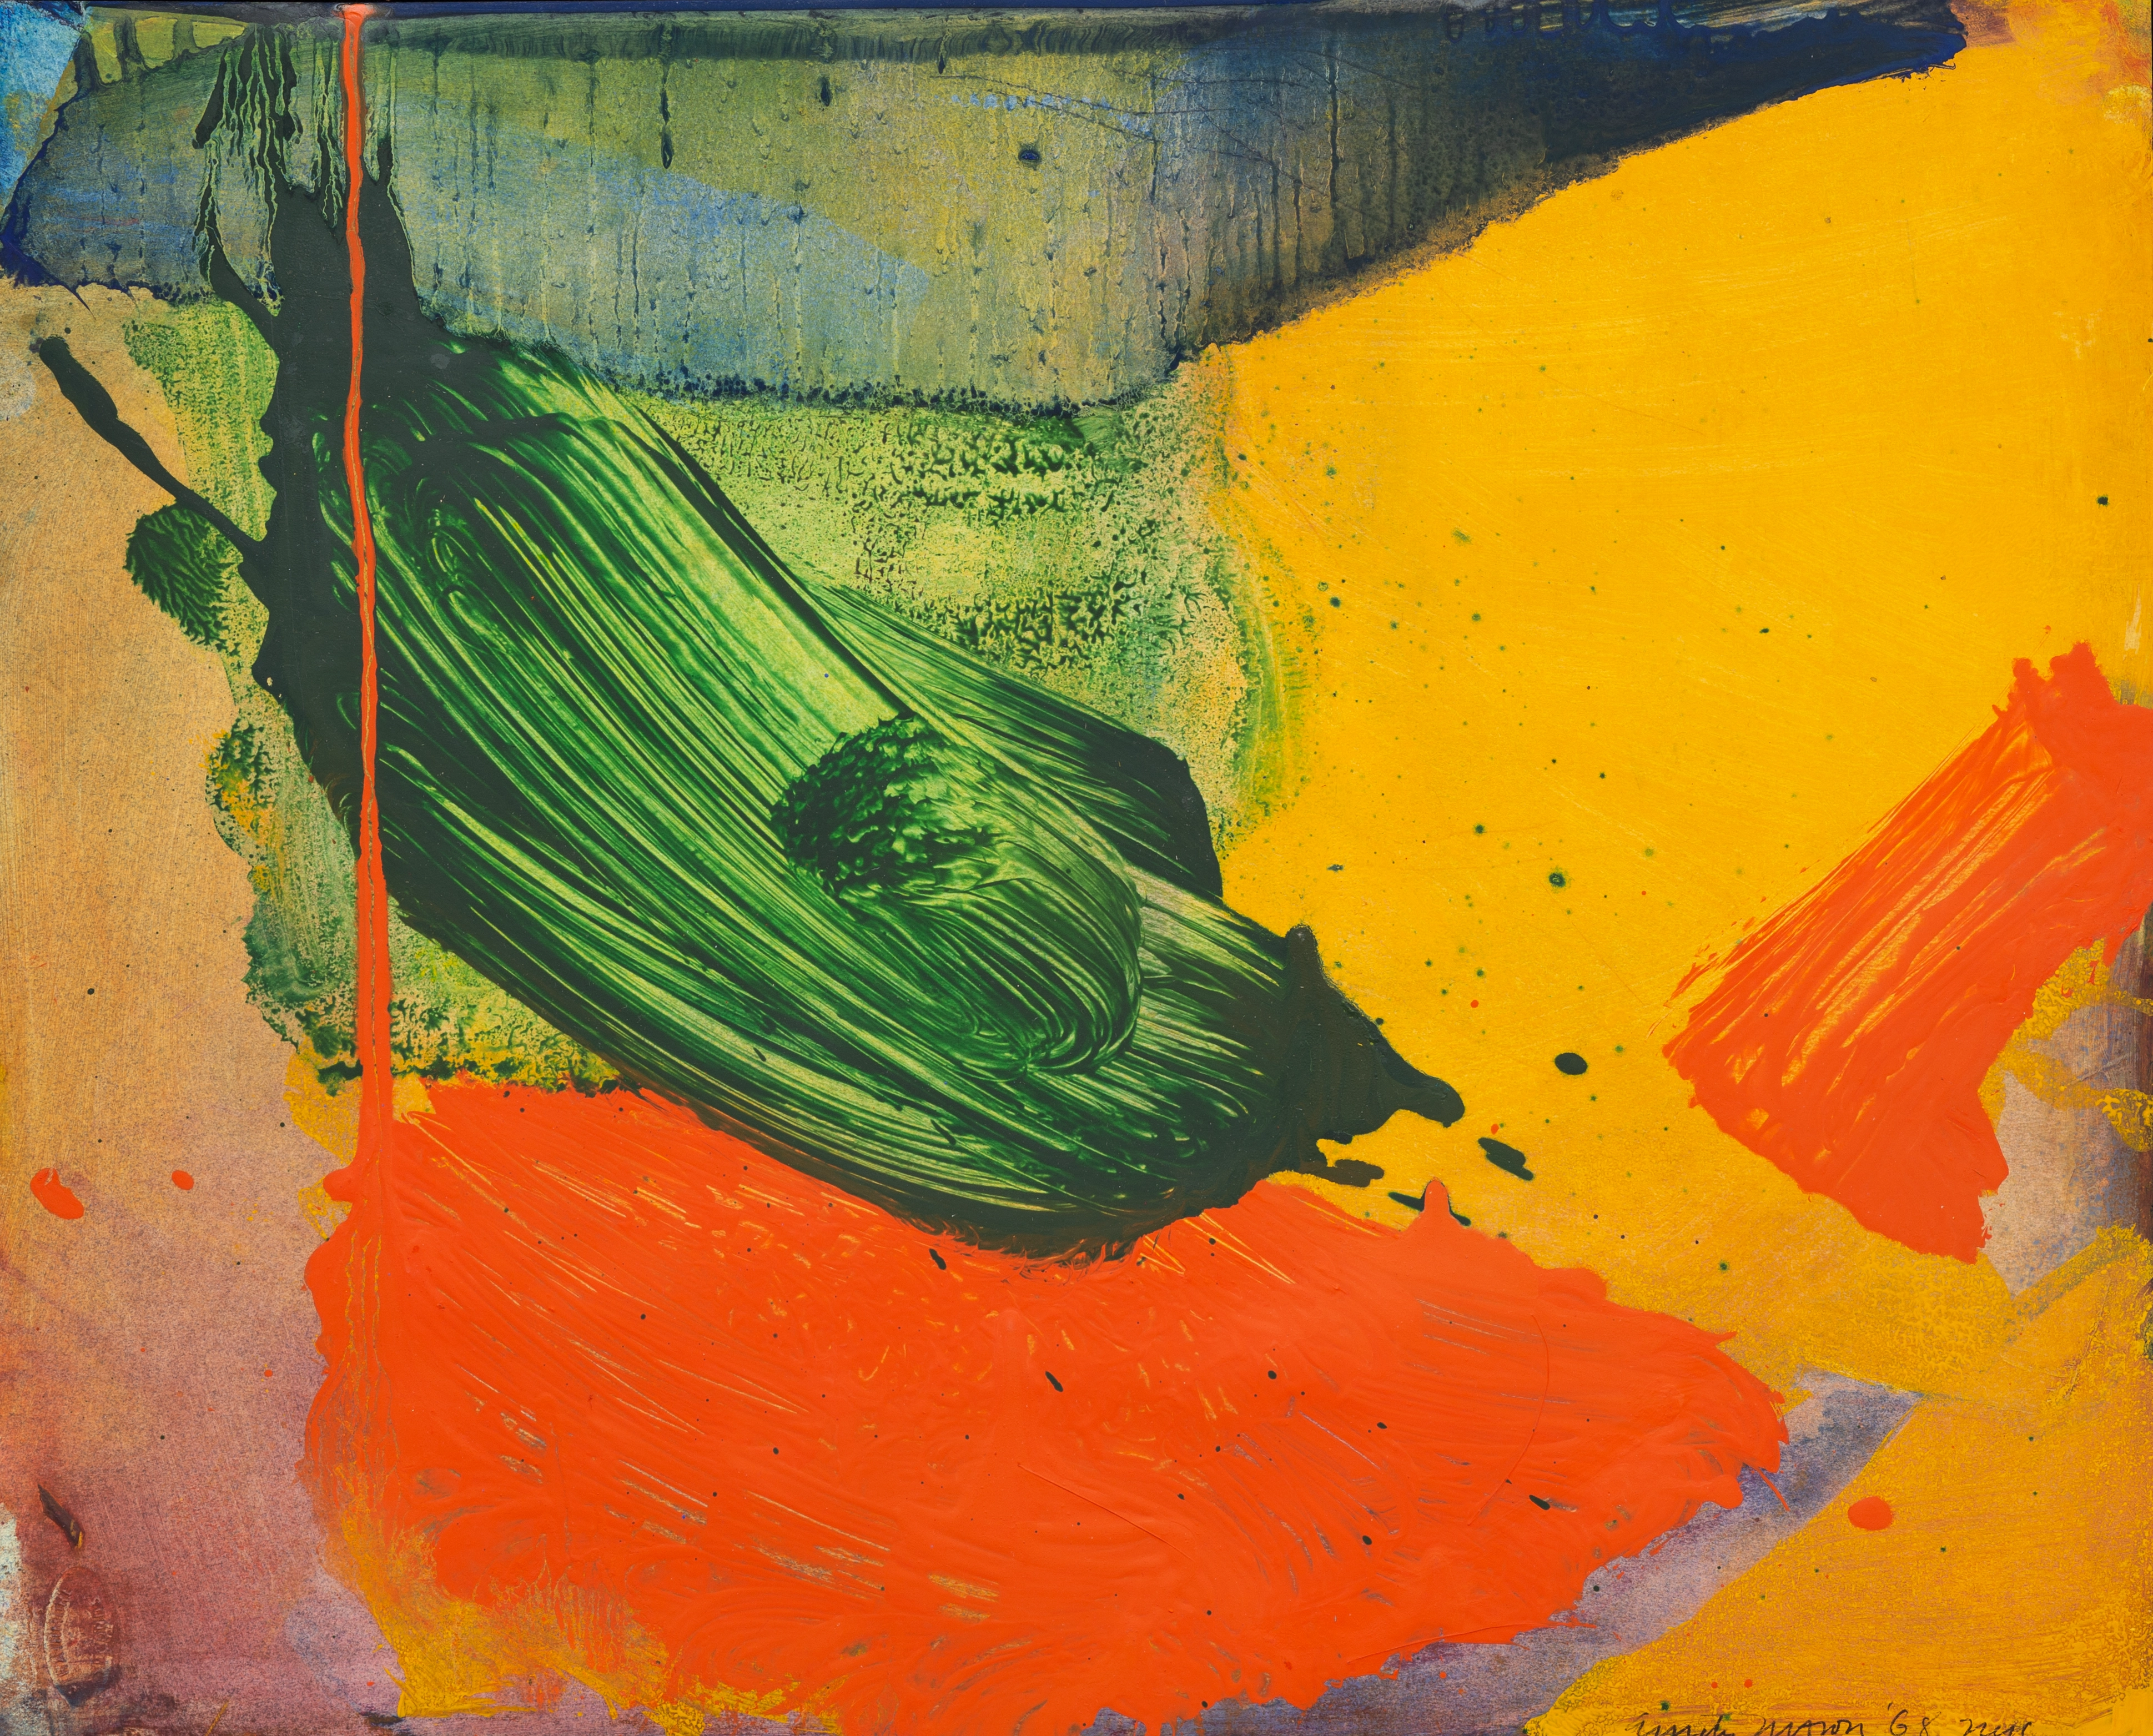 Abstract oil on paper, with yellow and blue fields of color in the background, with large red and green brushstrokes in the foreground.